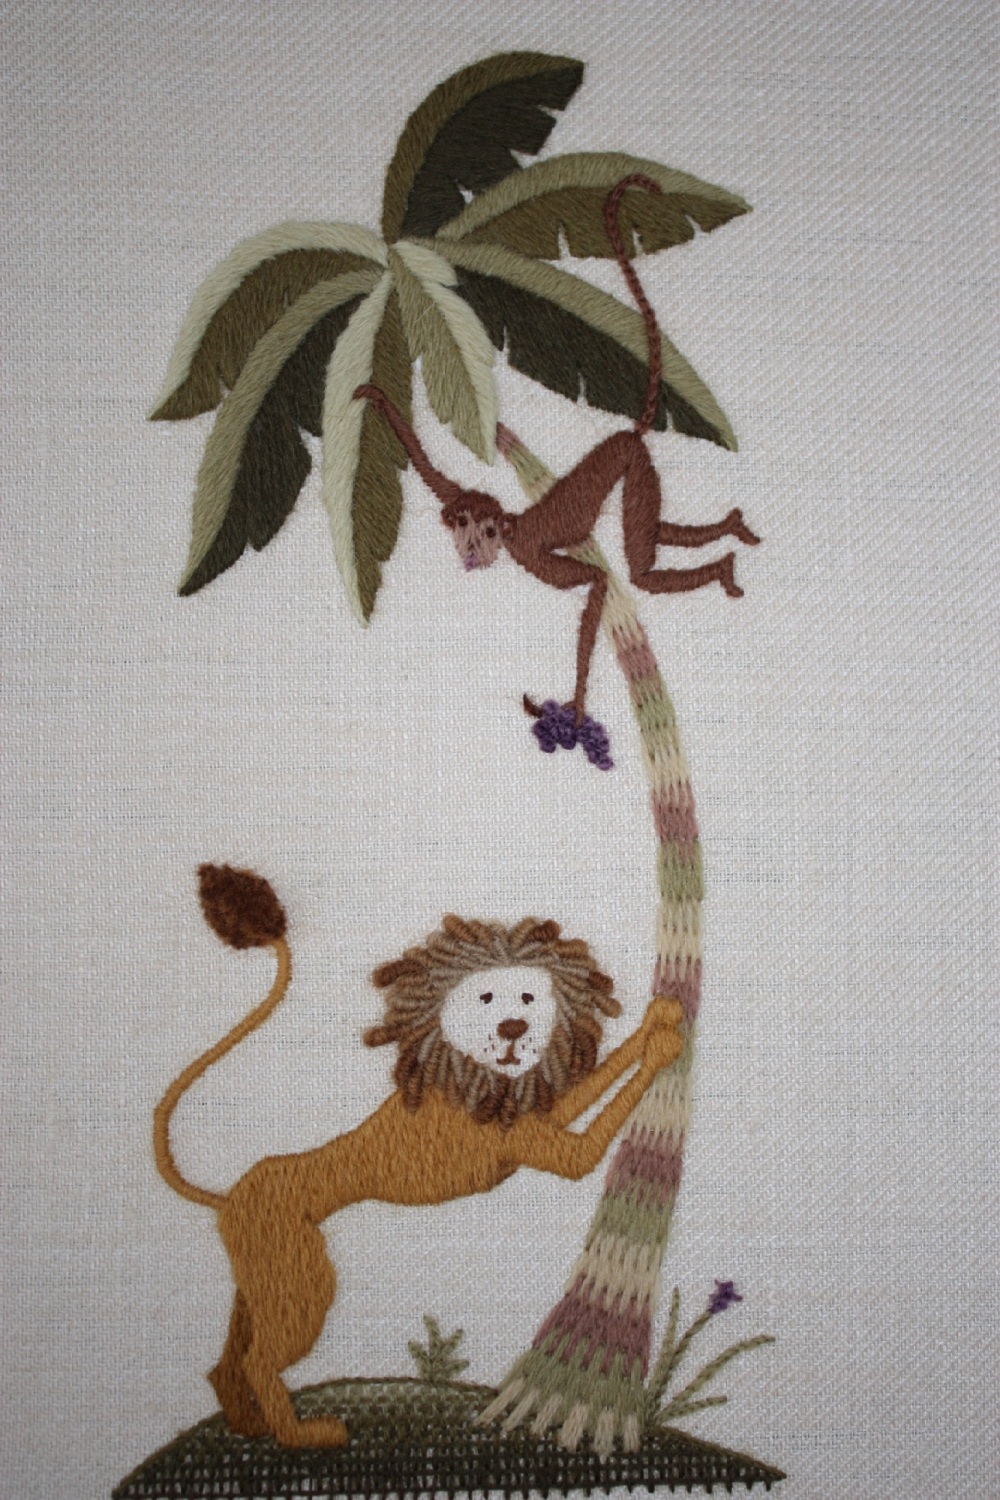 Lion and Monkey Crewelwork Kit